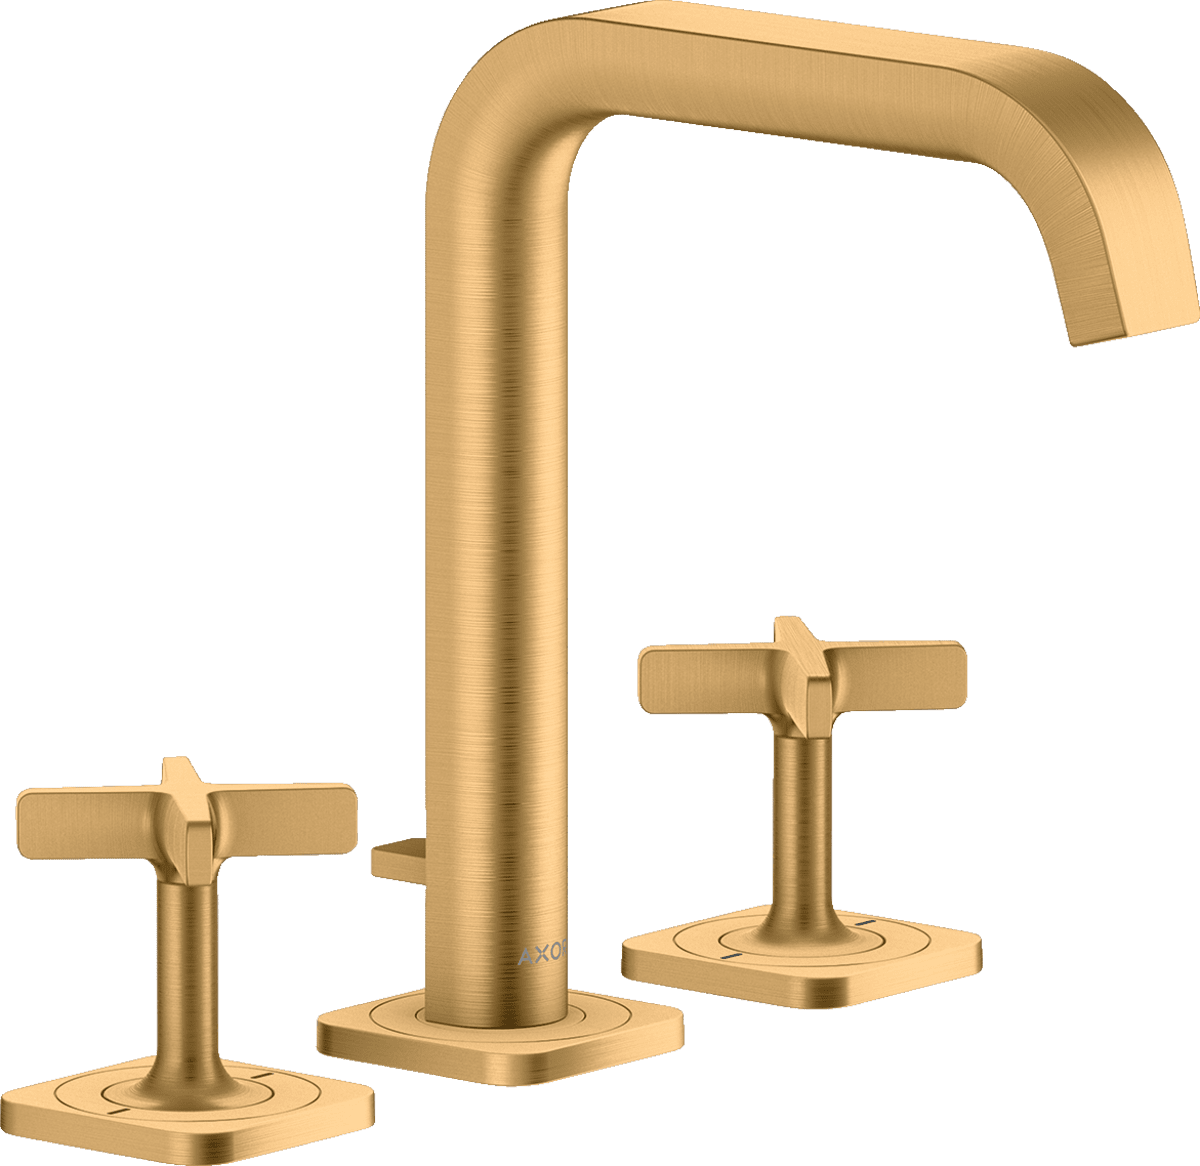 Picture of HANSGROHE AXOR Citterio E 3-hole basin mixer 170 with escutcheons and pop-up waste set #36108950 - Brushed Brass